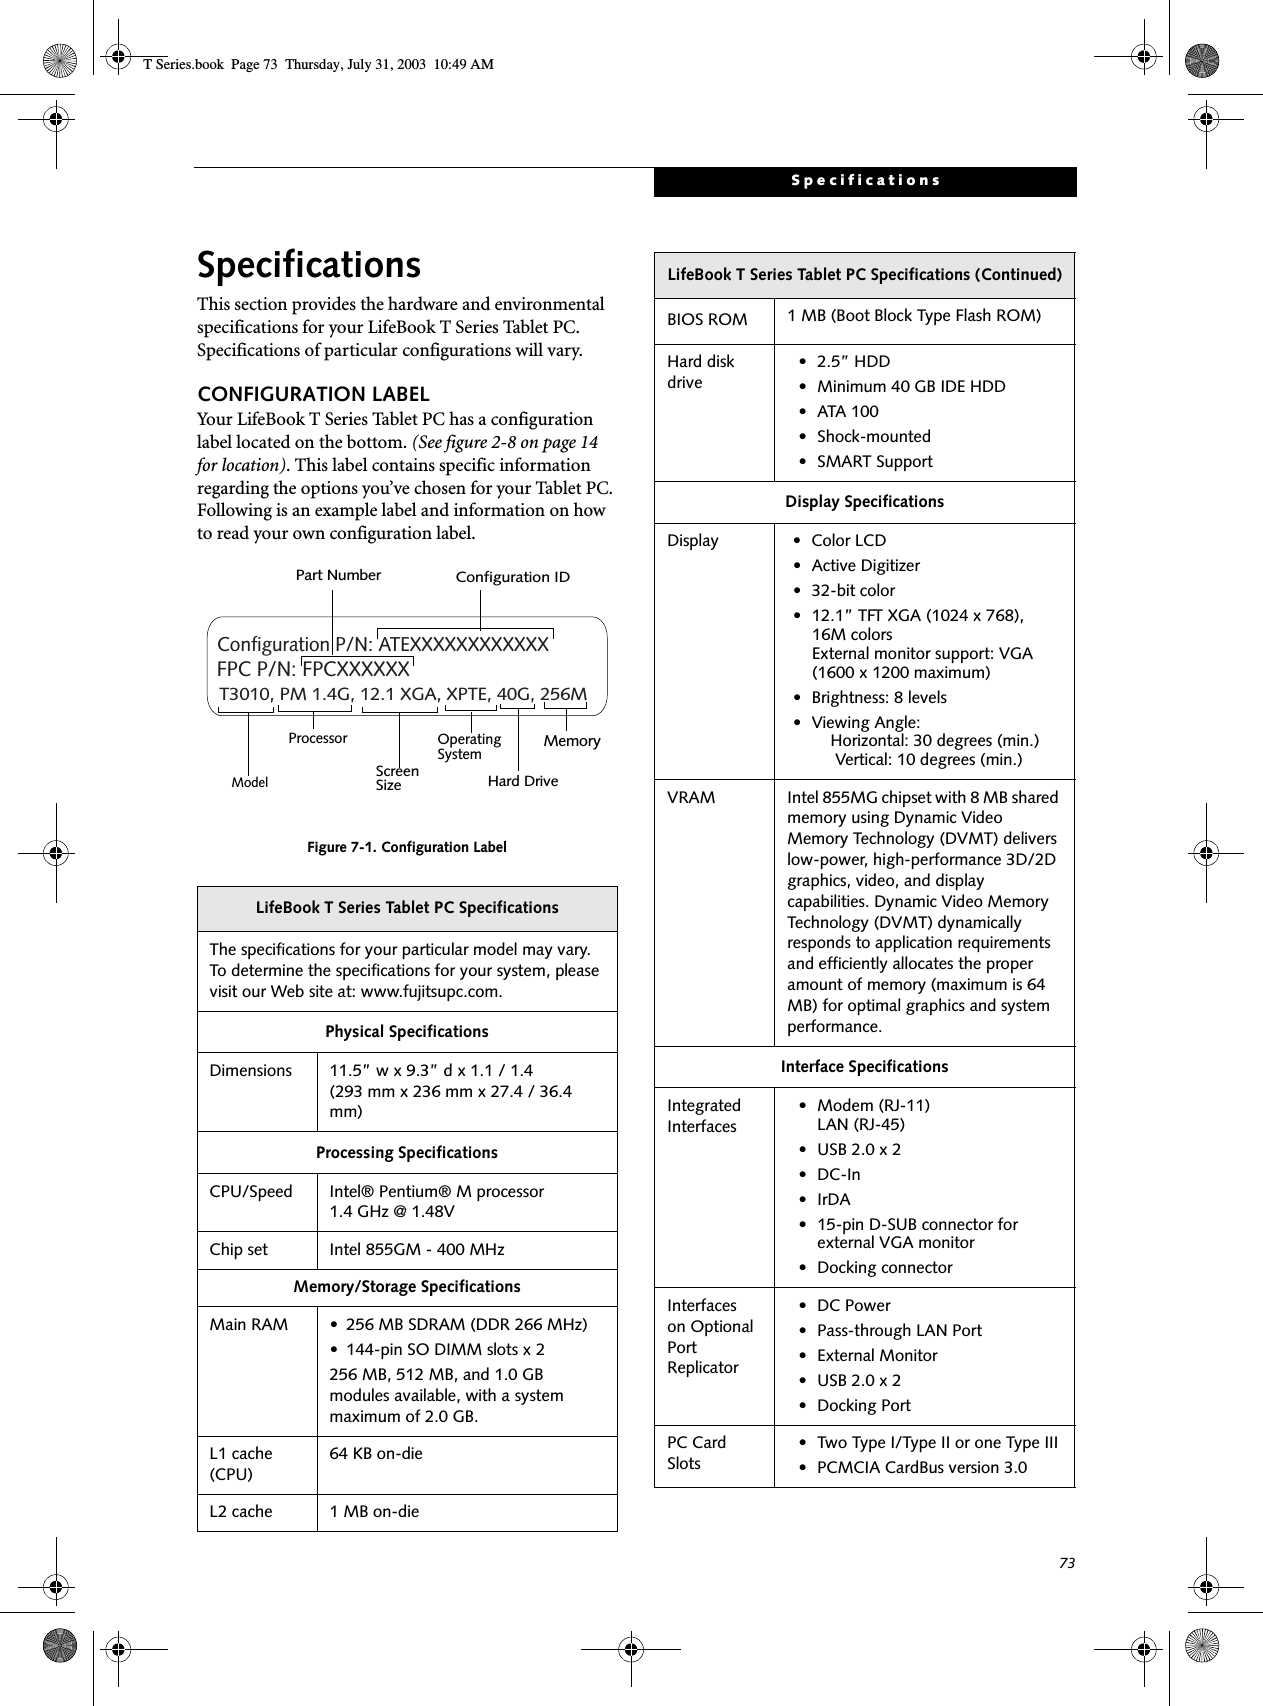 73SpecificationsSpecificationsThis section provides the hardware and environmental specifications for your LifeBook T Series Tablet PC. Specifications of particular configurations will vary.CONFIGURATION LABELYour LifeBook T Series Tablet PC has a configuration label located on the bottom. (See figure 2-8 on page 14 for location). This label contains specific information regarding the options you’ve chosen for your Tablet PC. Following is an example label and information on how to read your own configuration label.Figure 7-1. Configuration LabelLifeBook T Series Tablet PC SpecificationsThe specifications for your particular model may vary. To determine the specifications for your system, please visit our Web site at: www.fujitsupc.com.Physical SpecificationsDimensions 11.5” w x 9.3” d x 1.1 / 1.4 (293 mm x 236 mm x 27.4 / 36.4 mm)Processing SpecificationsCPU/Speed Intel® Pentium® M processor 1.4 GHz @ 1.48V Chip set Intel 855GM - 400 MHzMemory/Storage SpecificationsMain RAM • 256 MB SDRAM (DDR 266 MHz)• 144-pin SO DIMM slots x 2256 MB, 512 MB, and 1.0 GB modules available, with a system maximum of 2.0 GB.L1 cache (CPU)64 KB on-die L2 cache 1 MB on-die T3010, PM 1.4G, 12.1 XGA, XPTE, 40G, 256MConfiguration P/N: ATEXXXXXXXXXXXXFPC P/N: FPCXXXXXXModelProcessorScreenSizeOperatingSystemHard Drive MemoryPart Number Configuration IDBIOS ROM 1 MB (Boot Block Type Flash ROM)Hard disk drive• 2.5” HDD• Minimum 40 GB IDE HDD• ATA 100• Shock-mounted• SMART SupportDisplay SpecificationsDisplay • Color LCD• Active Digitizer• 32-bit color• 12.1” TFT XGA (1024 x 768), 16M colors External monitor support: VGA (1600 x 1200 maximum) • Brightness: 8 levels• Viewing Angle:    Horizontal: 30 degrees (min.)     Vertical: 10 degrees (min.)VRAM Intel 855MG chipset with 8 MB shared memory using Dynamic Video Memory Technology (DVMT) delivers low-power, high-performance 3D/2D graphics, video, and display capabilities. Dynamic Video Memory Technology (DVMT) dynamically responds to application requirements and efficiently allocates the proper amount of memory (maximum is 64 MB) for optimal graphics and system performance. Interface SpecificationsIntegrated Interfaces• Modem (RJ-11)LAN (RJ-45)• USB 2.0 x 2•DC-In•IrDA• 15-pin D-SUB connector for external VGA monitor• Docking connectorInterfaceson Optional Port Replicator • DC Power• Pass-through LAN Port• External Monitor• USB 2.0 x 2• Docking PortPC Card Slots• Two Type I/Type II or one Type III• PCMCIA CardBus version 3.0LifeBook T Series Tablet PC Specifications (Continued)T Series.book  Page 73  Thursday, July 31, 2003  10:49 AM